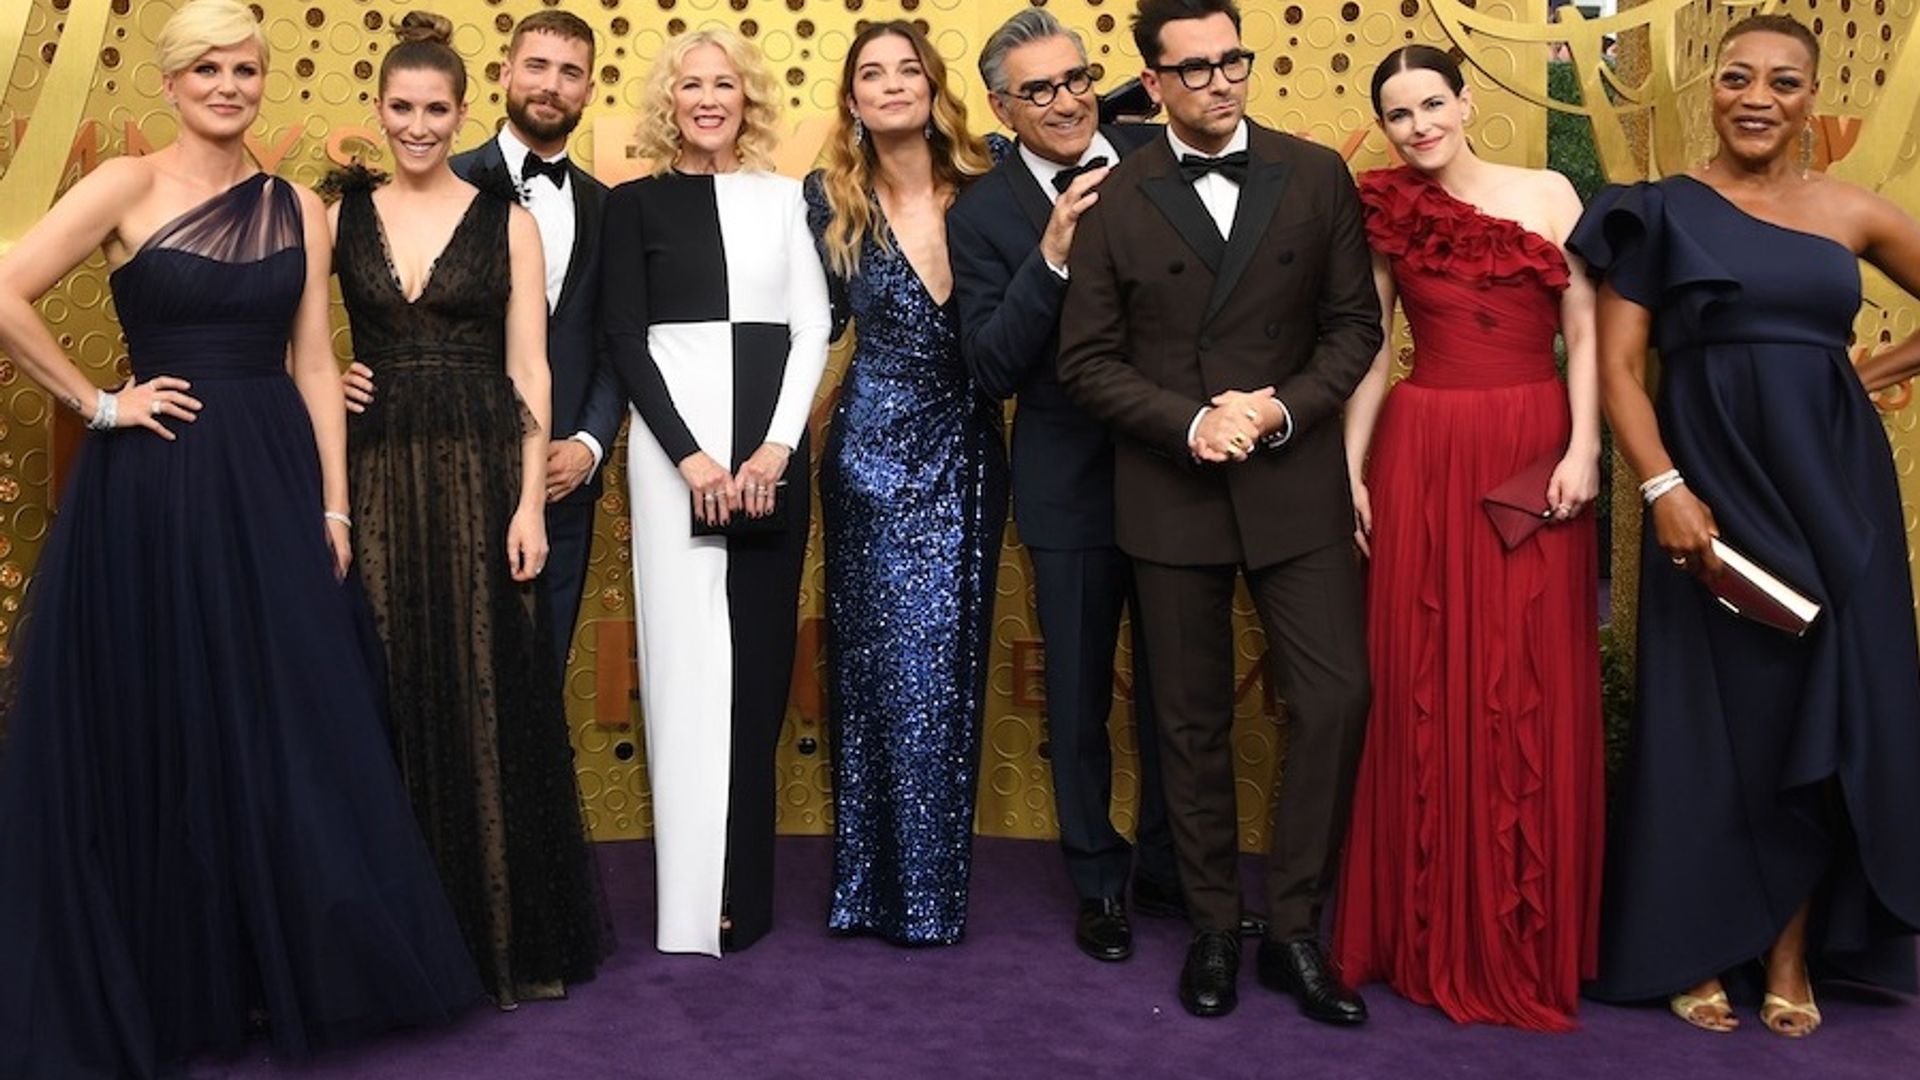 Canada's beloved 'Schitt's Creek' sweeps the comedy categories at 2020 Emmy Awards